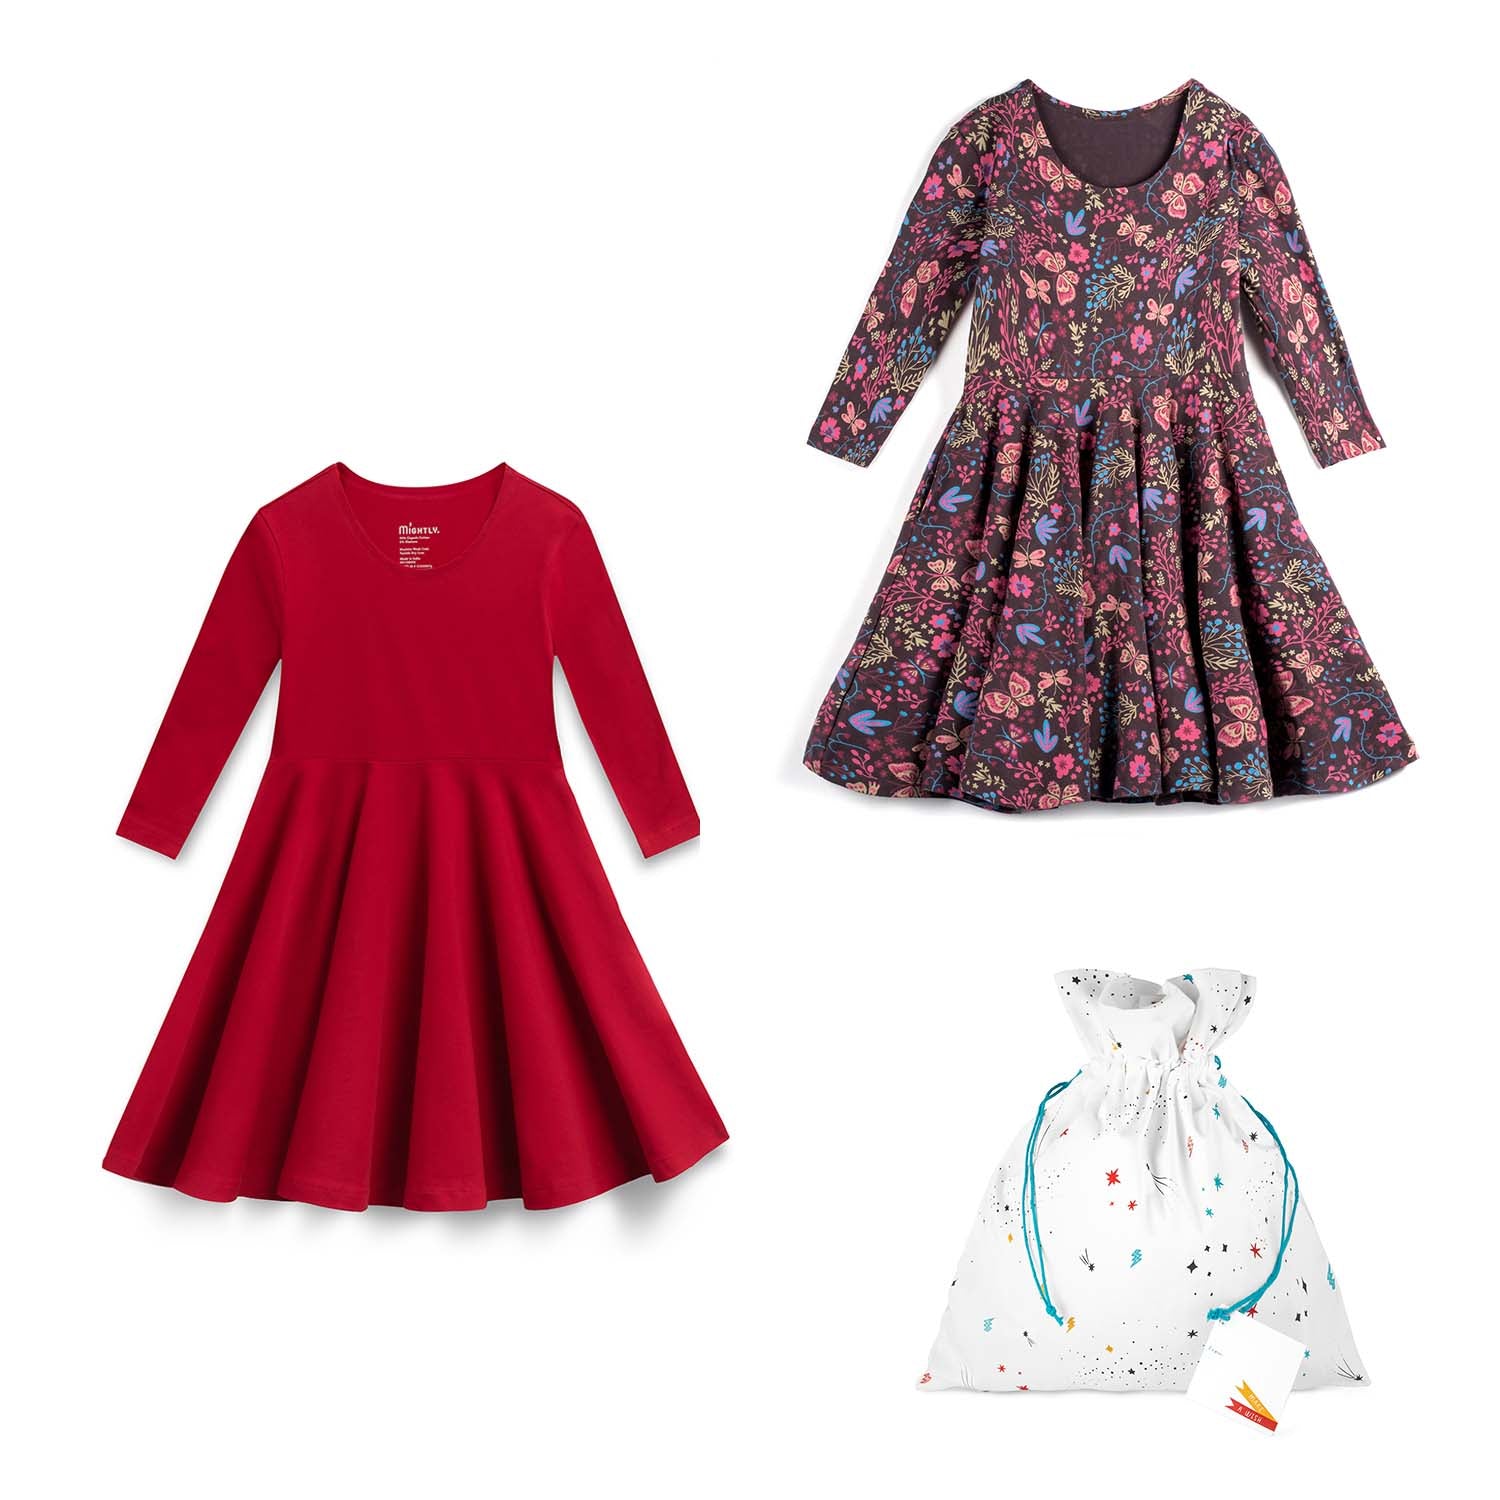 Gift Set: Two Holiday Twirl Dresses with a Reusable Fabric Gift Bag